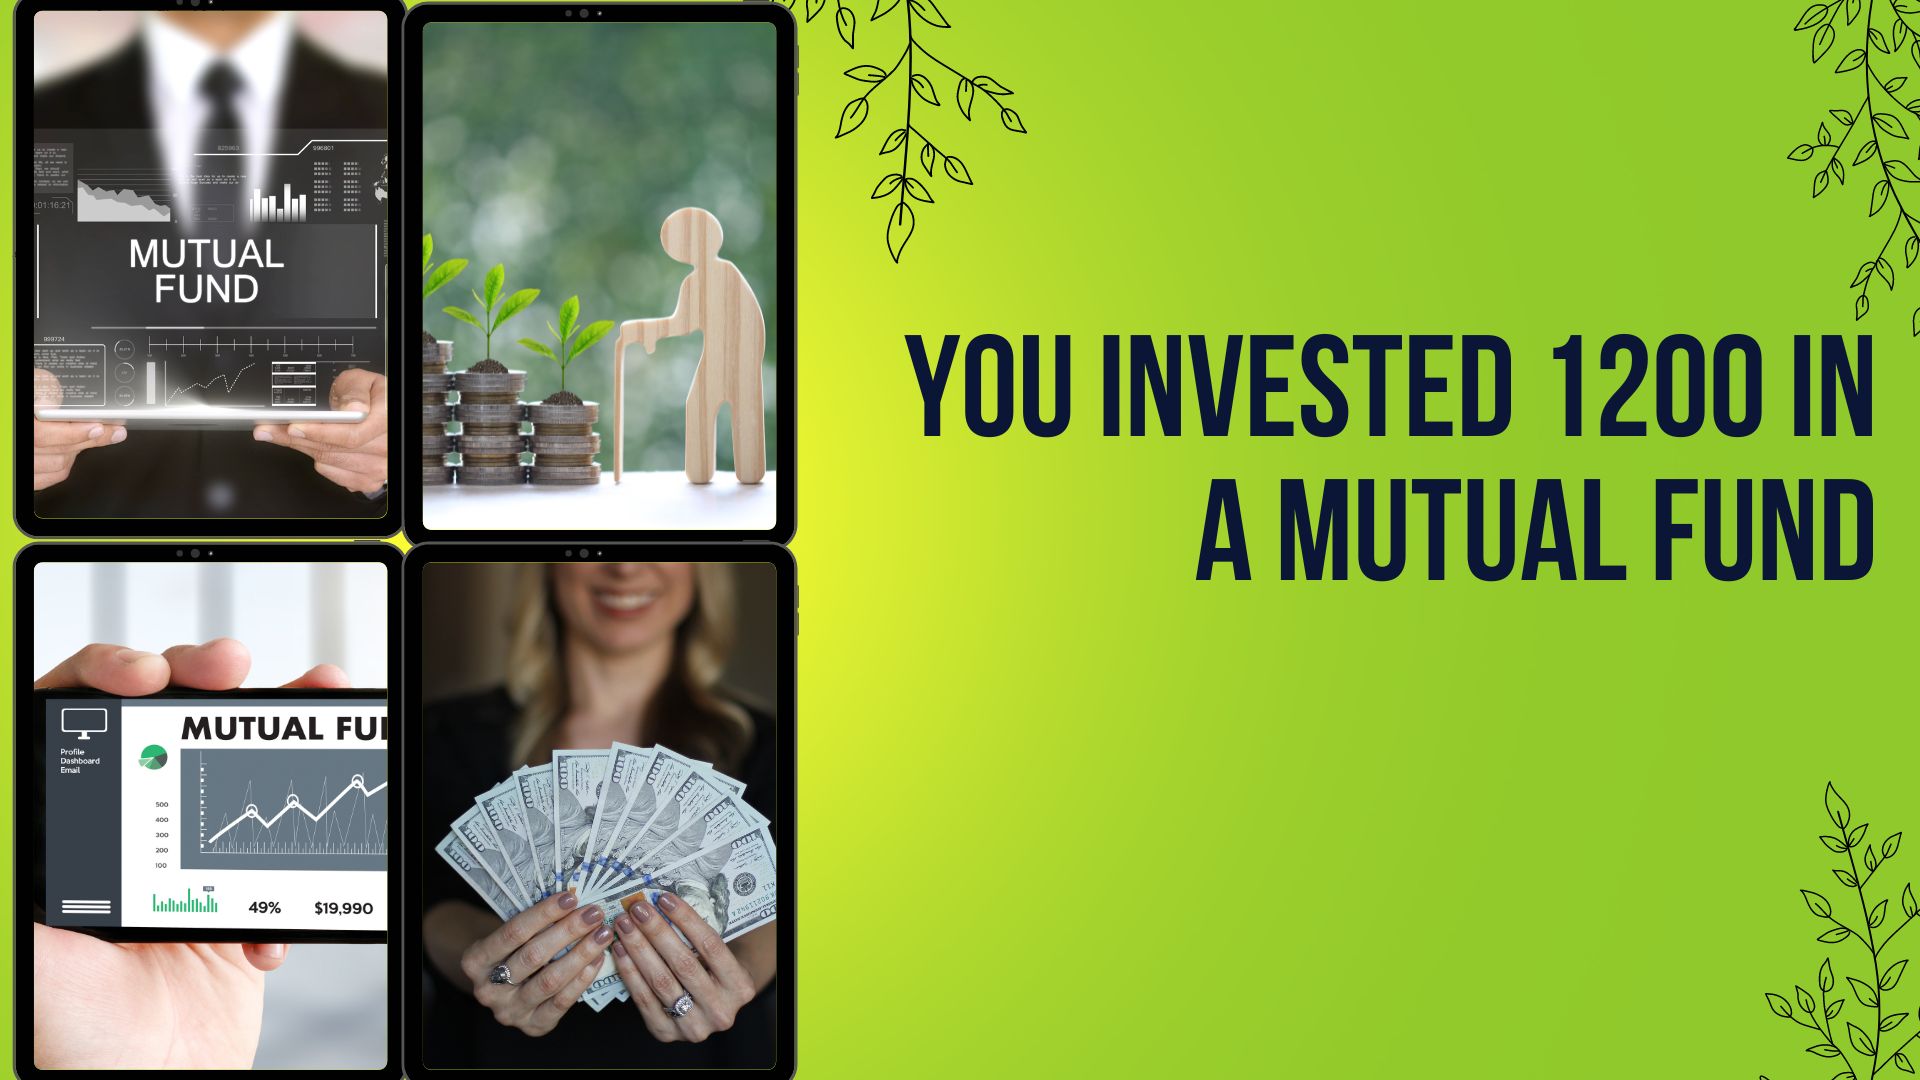 You Invested 1200 in a Mutual Fund